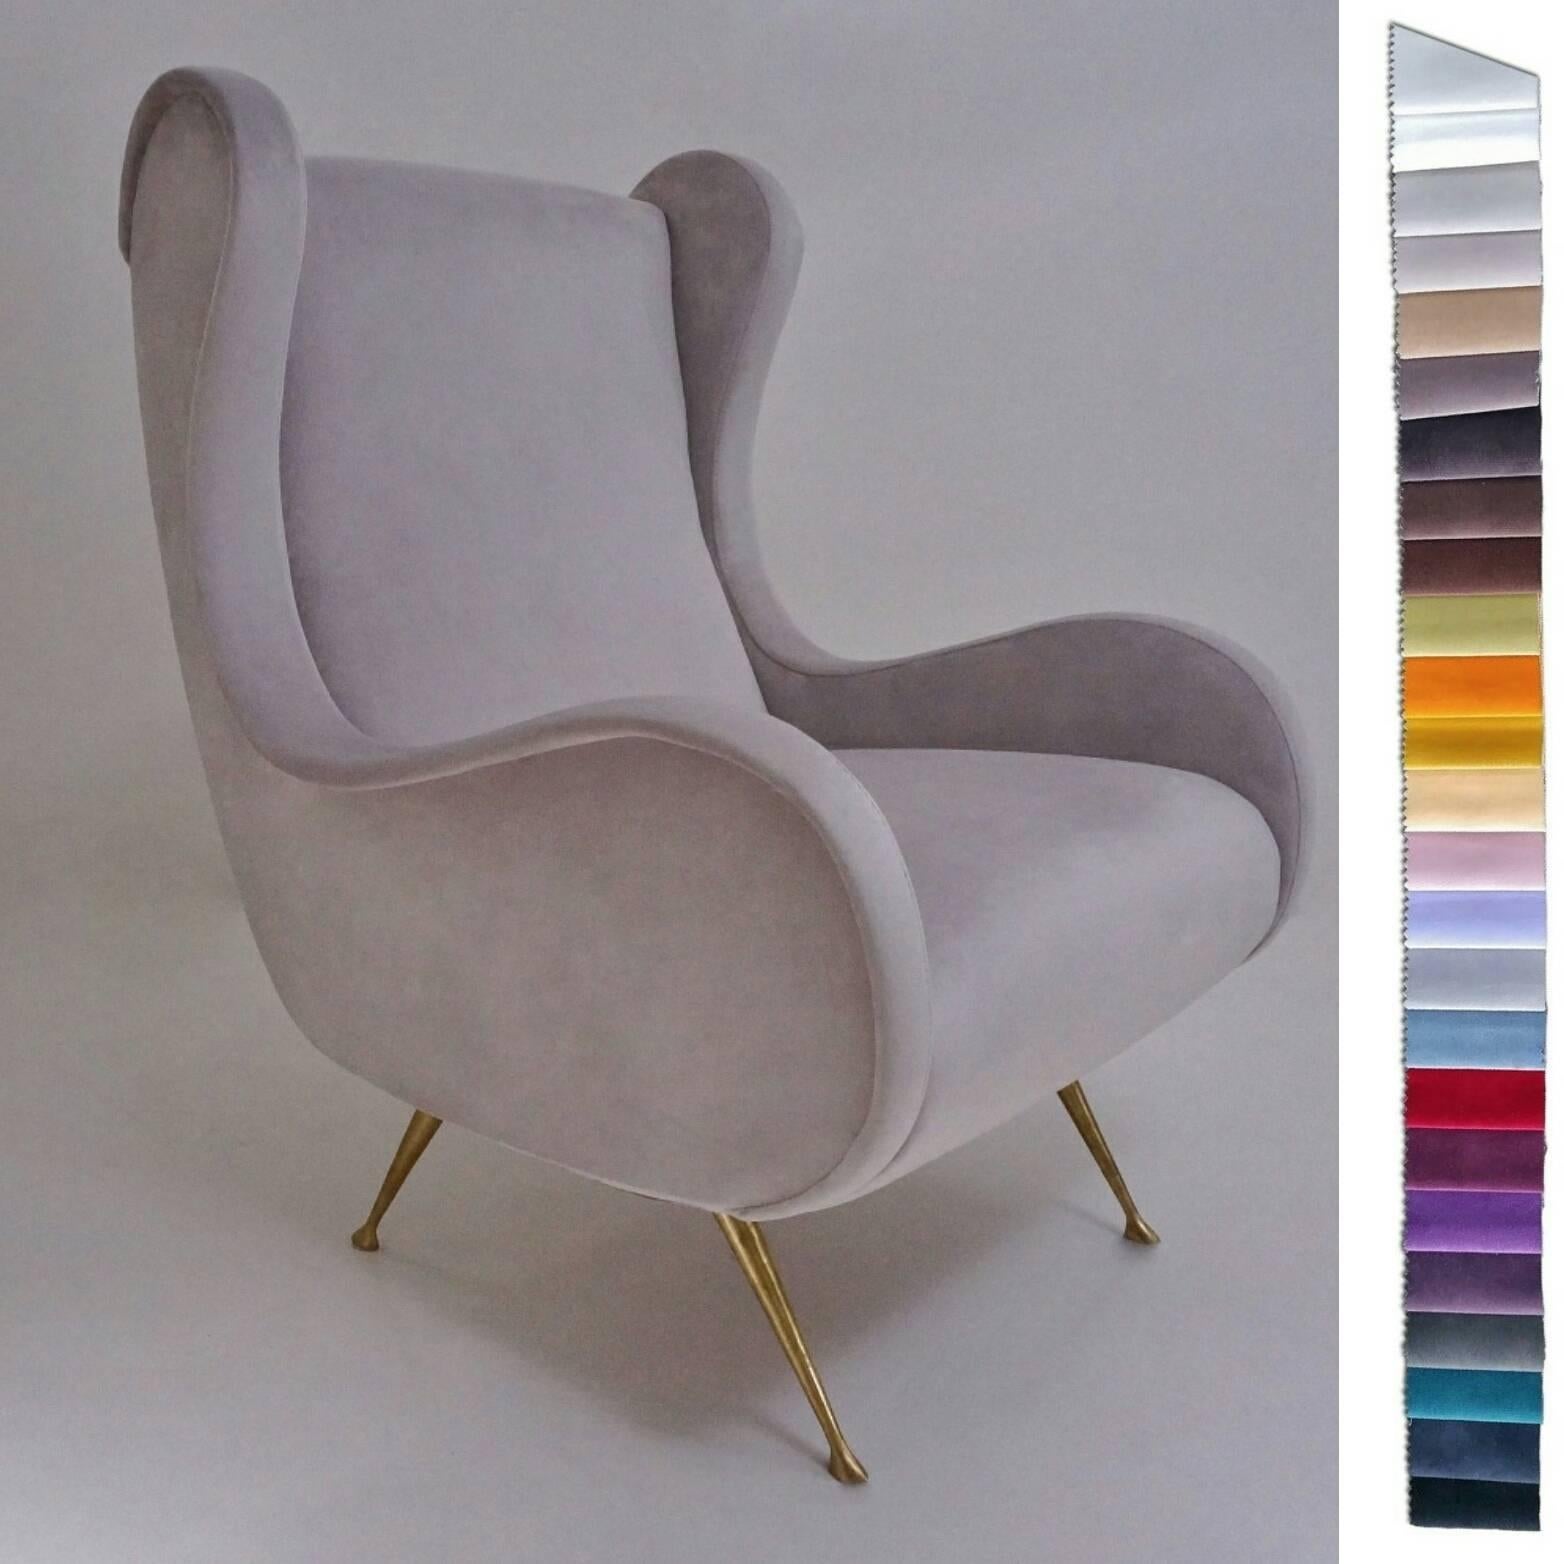 Marco Zanuso Senior armchair, Contemporary Collection 1950s style. 

In new Ivory colour velvet upholstery with solid handmade brass legs, Italian. Made exclusively for Roomscape`s Contemporary Collection.

This armchair is available to order and